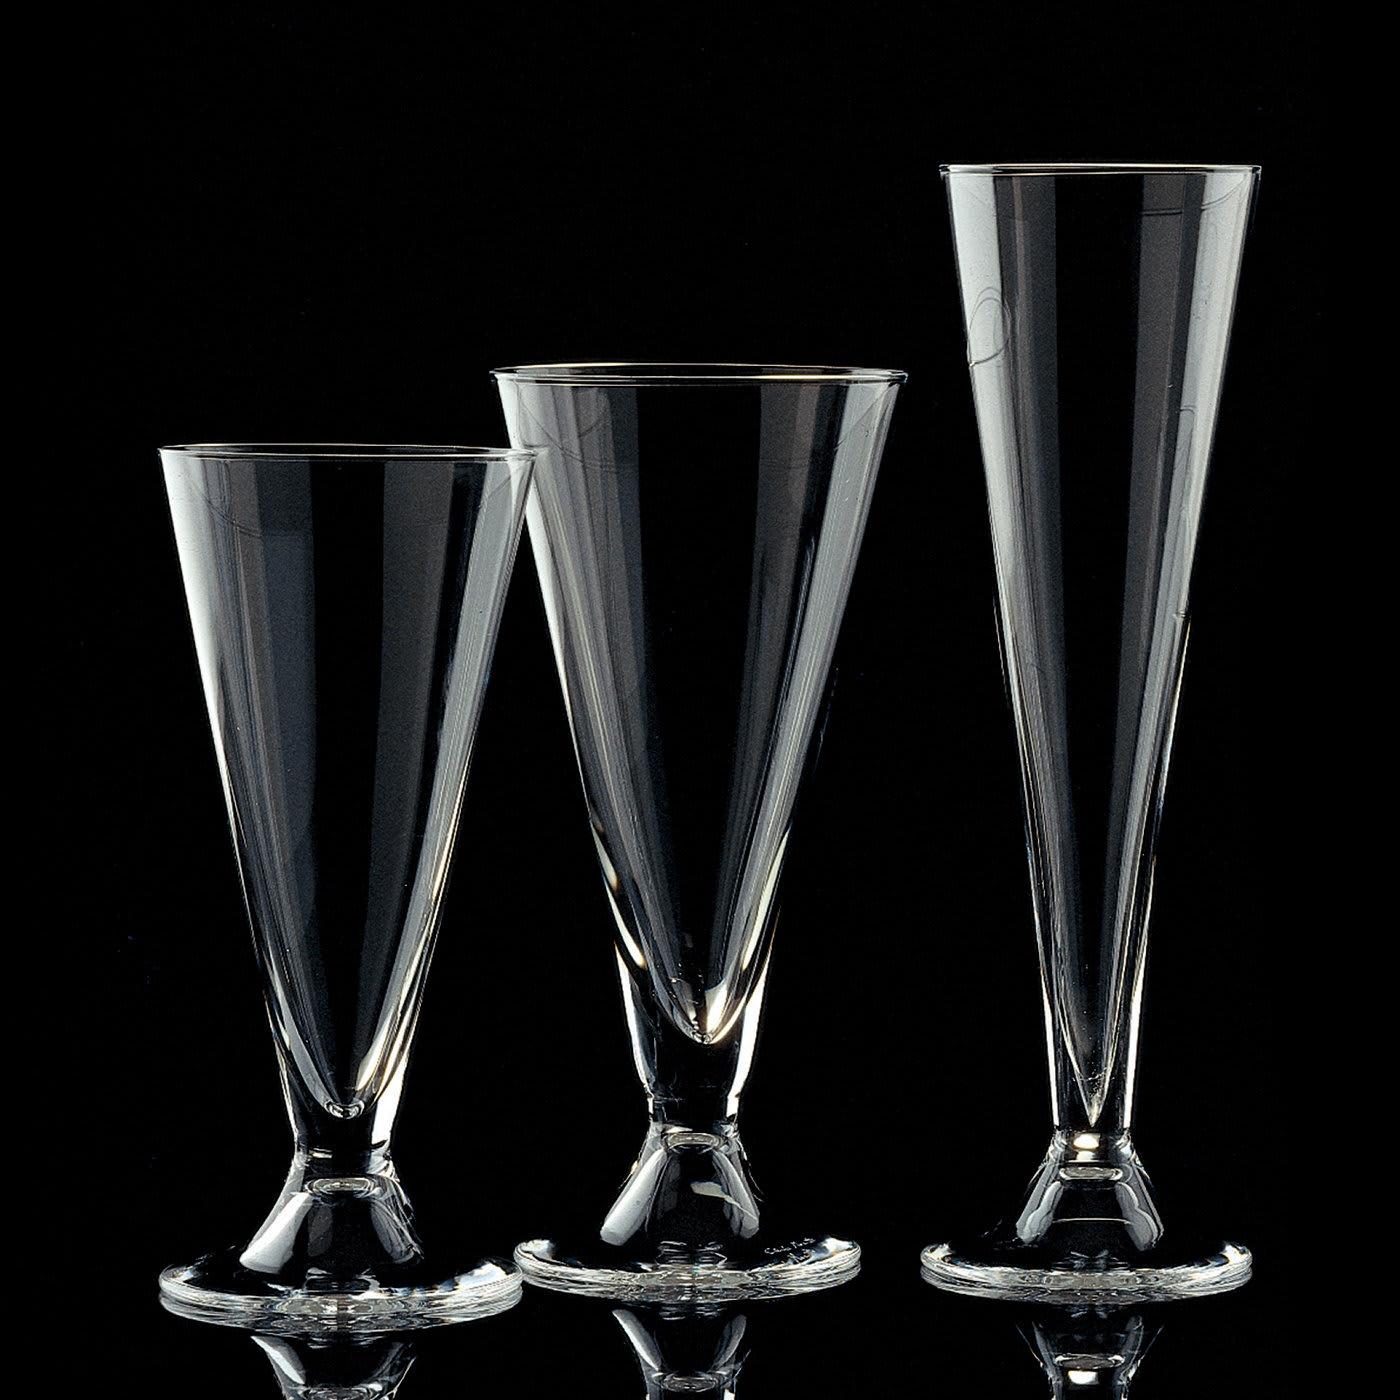 An exquisite piece of functional decor, this set of 6 flutes is a testament to refined vintage tableware. Designed in 1974, this piece is entirely handcrafted of mouth-blown Murano glass and finished by hand with a curved and capacious oval-shaped